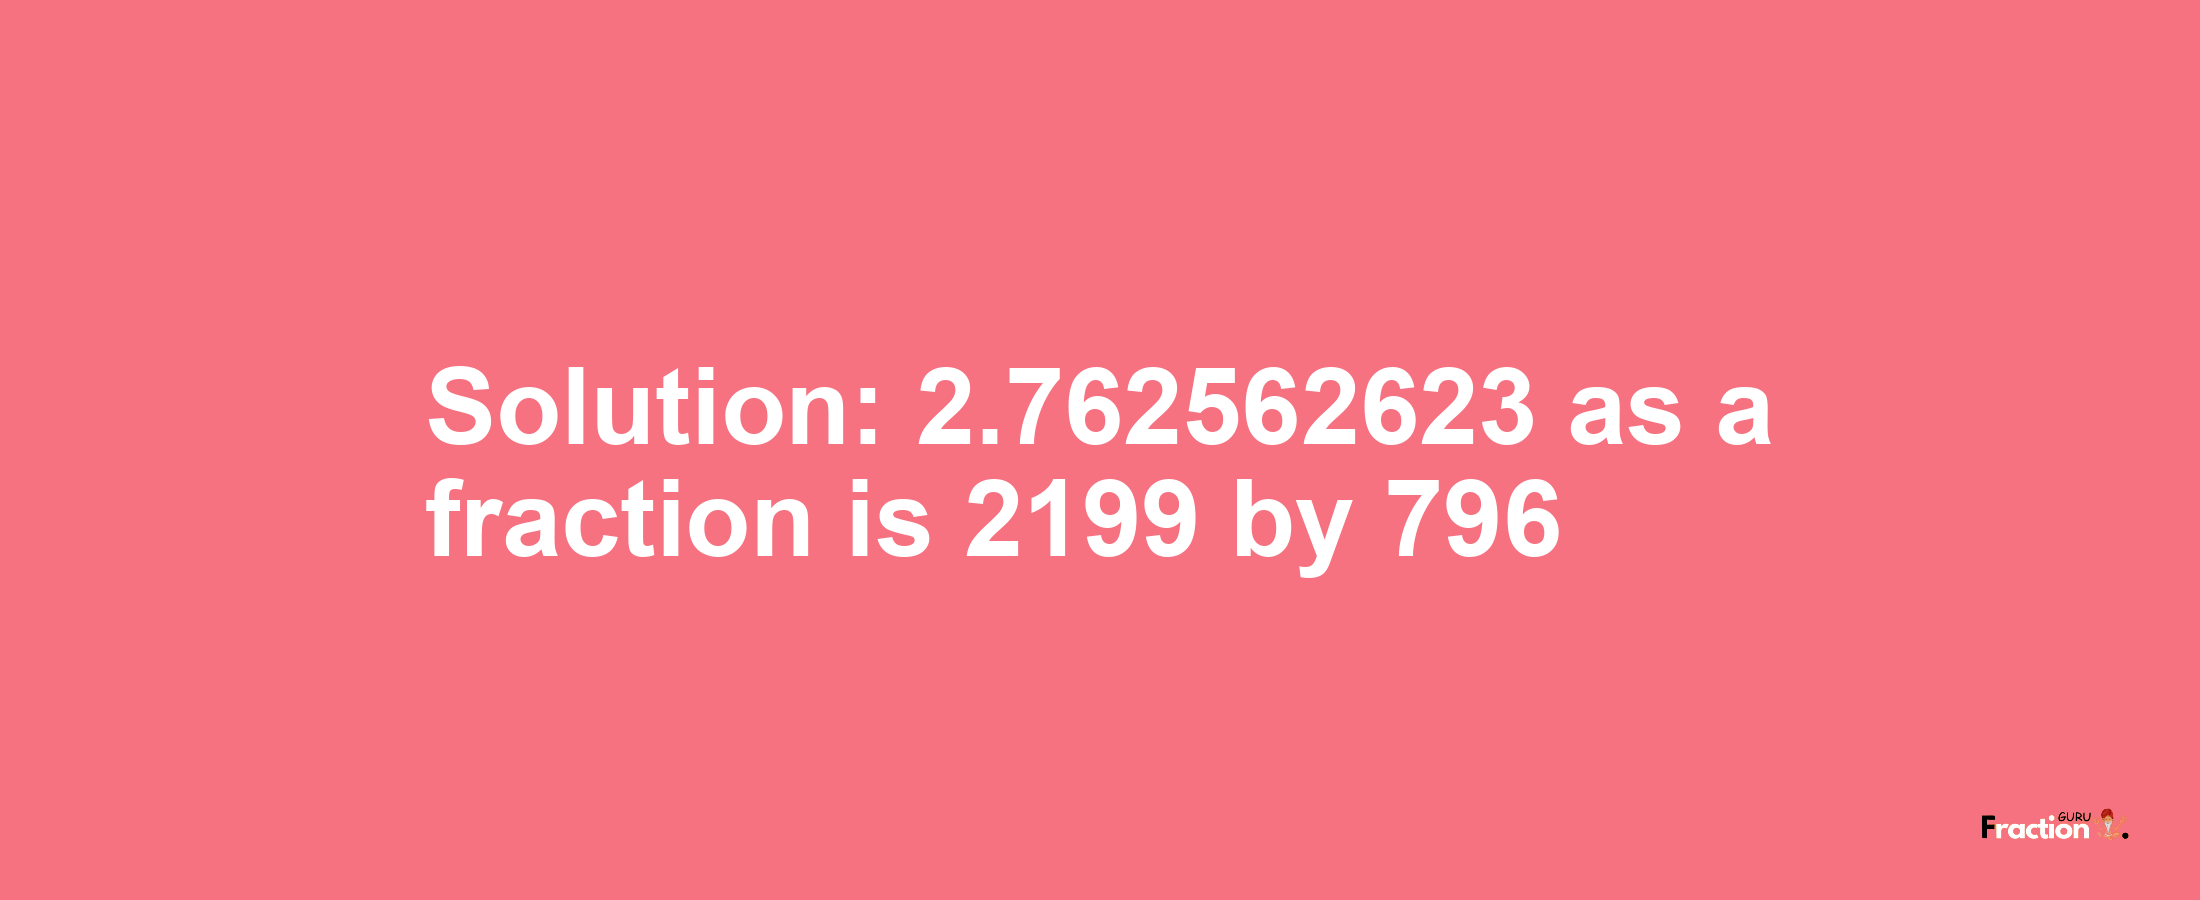 Solution:2.762562623 as a fraction is 2199/796